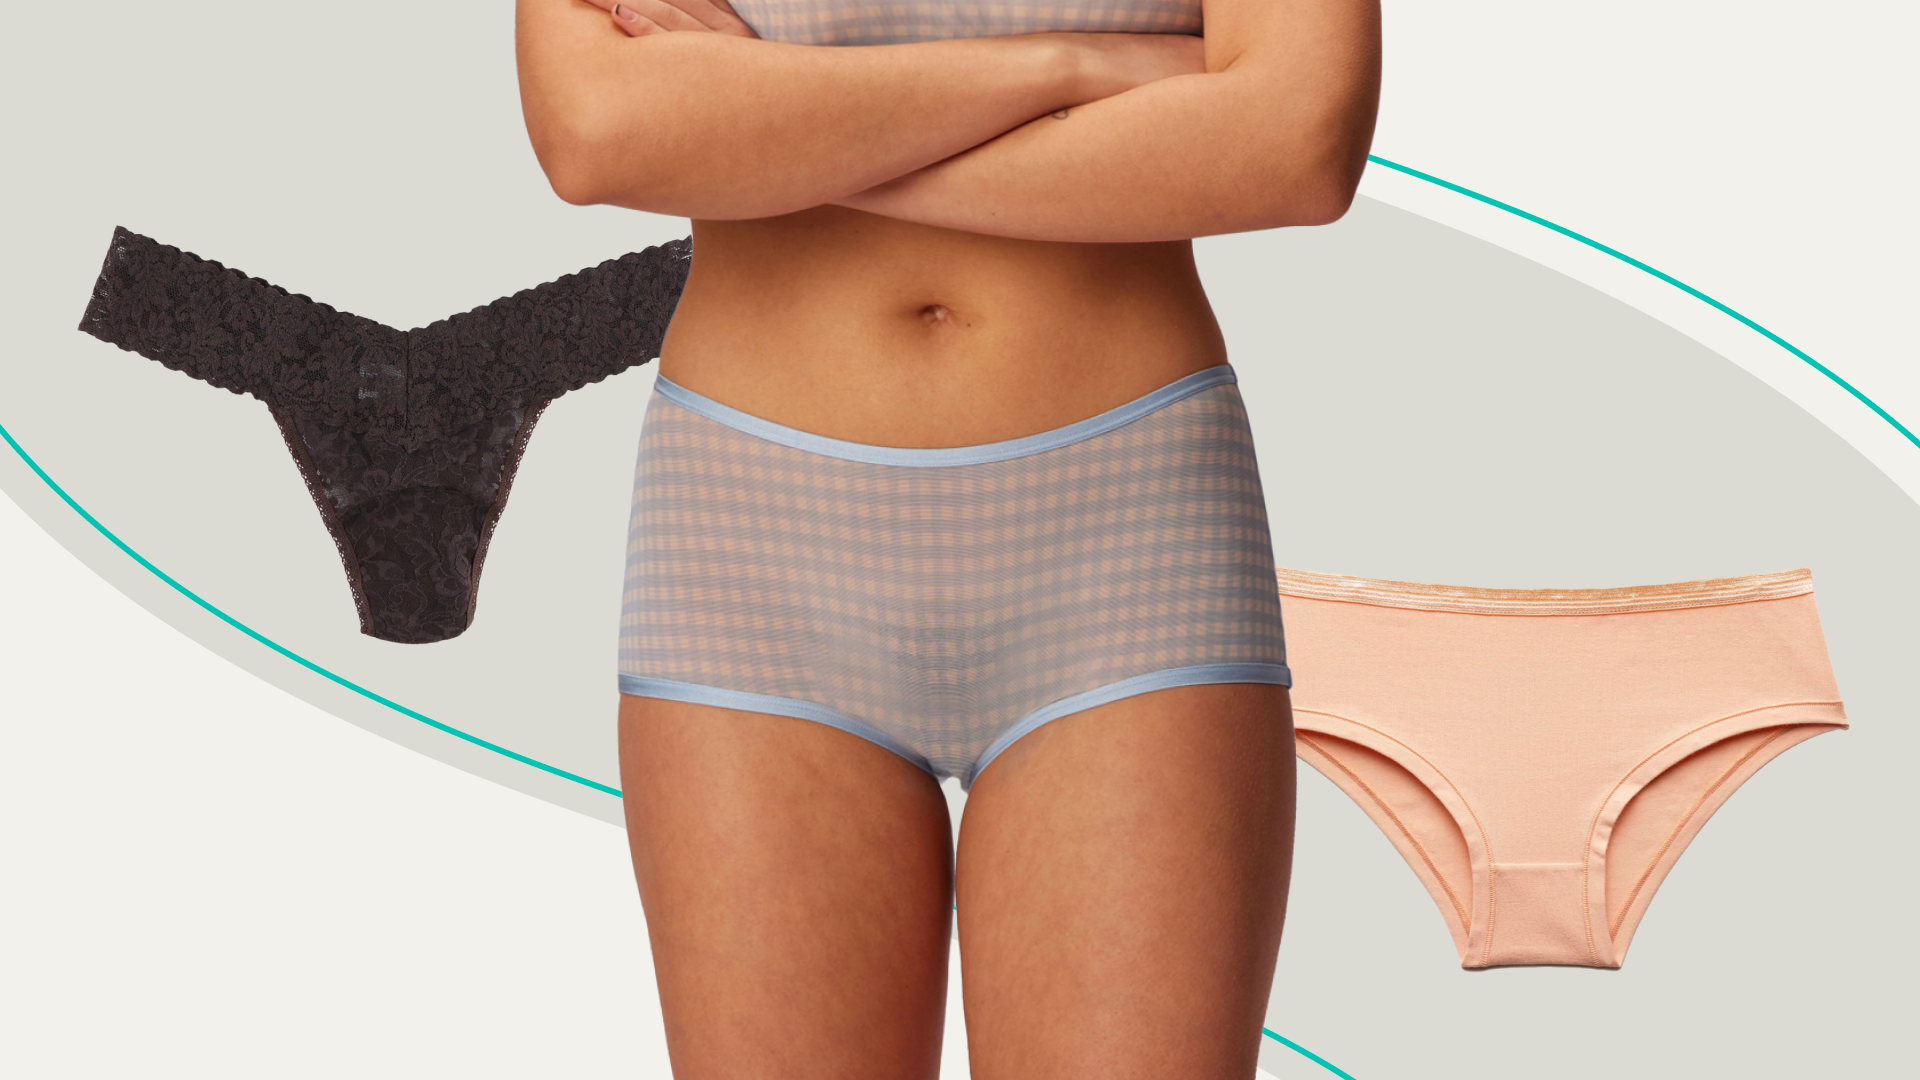 Women's Undies made with Organic Cotton, Pact